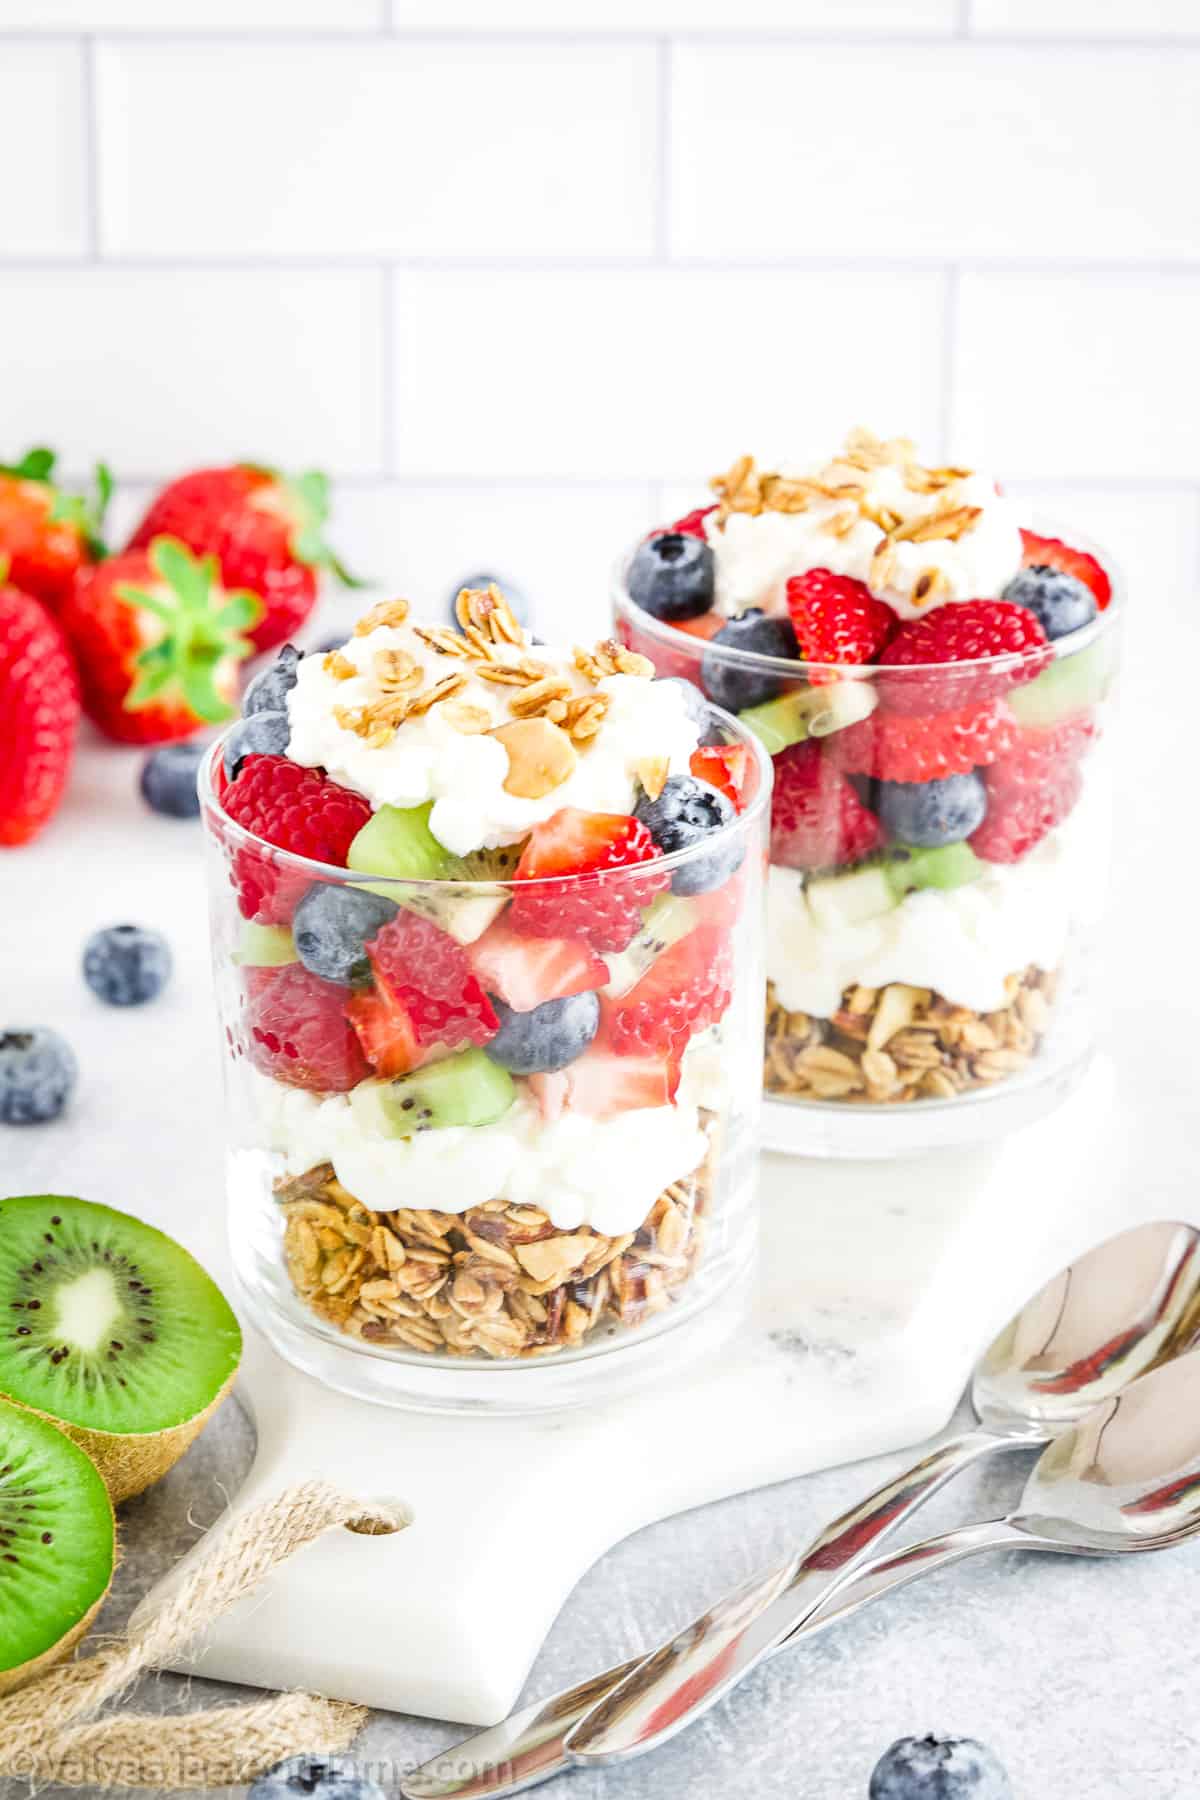 This recipe is a cinch to put together. With just a few simple steps, you'll have a delicious and nutritious parfait ready in no time.